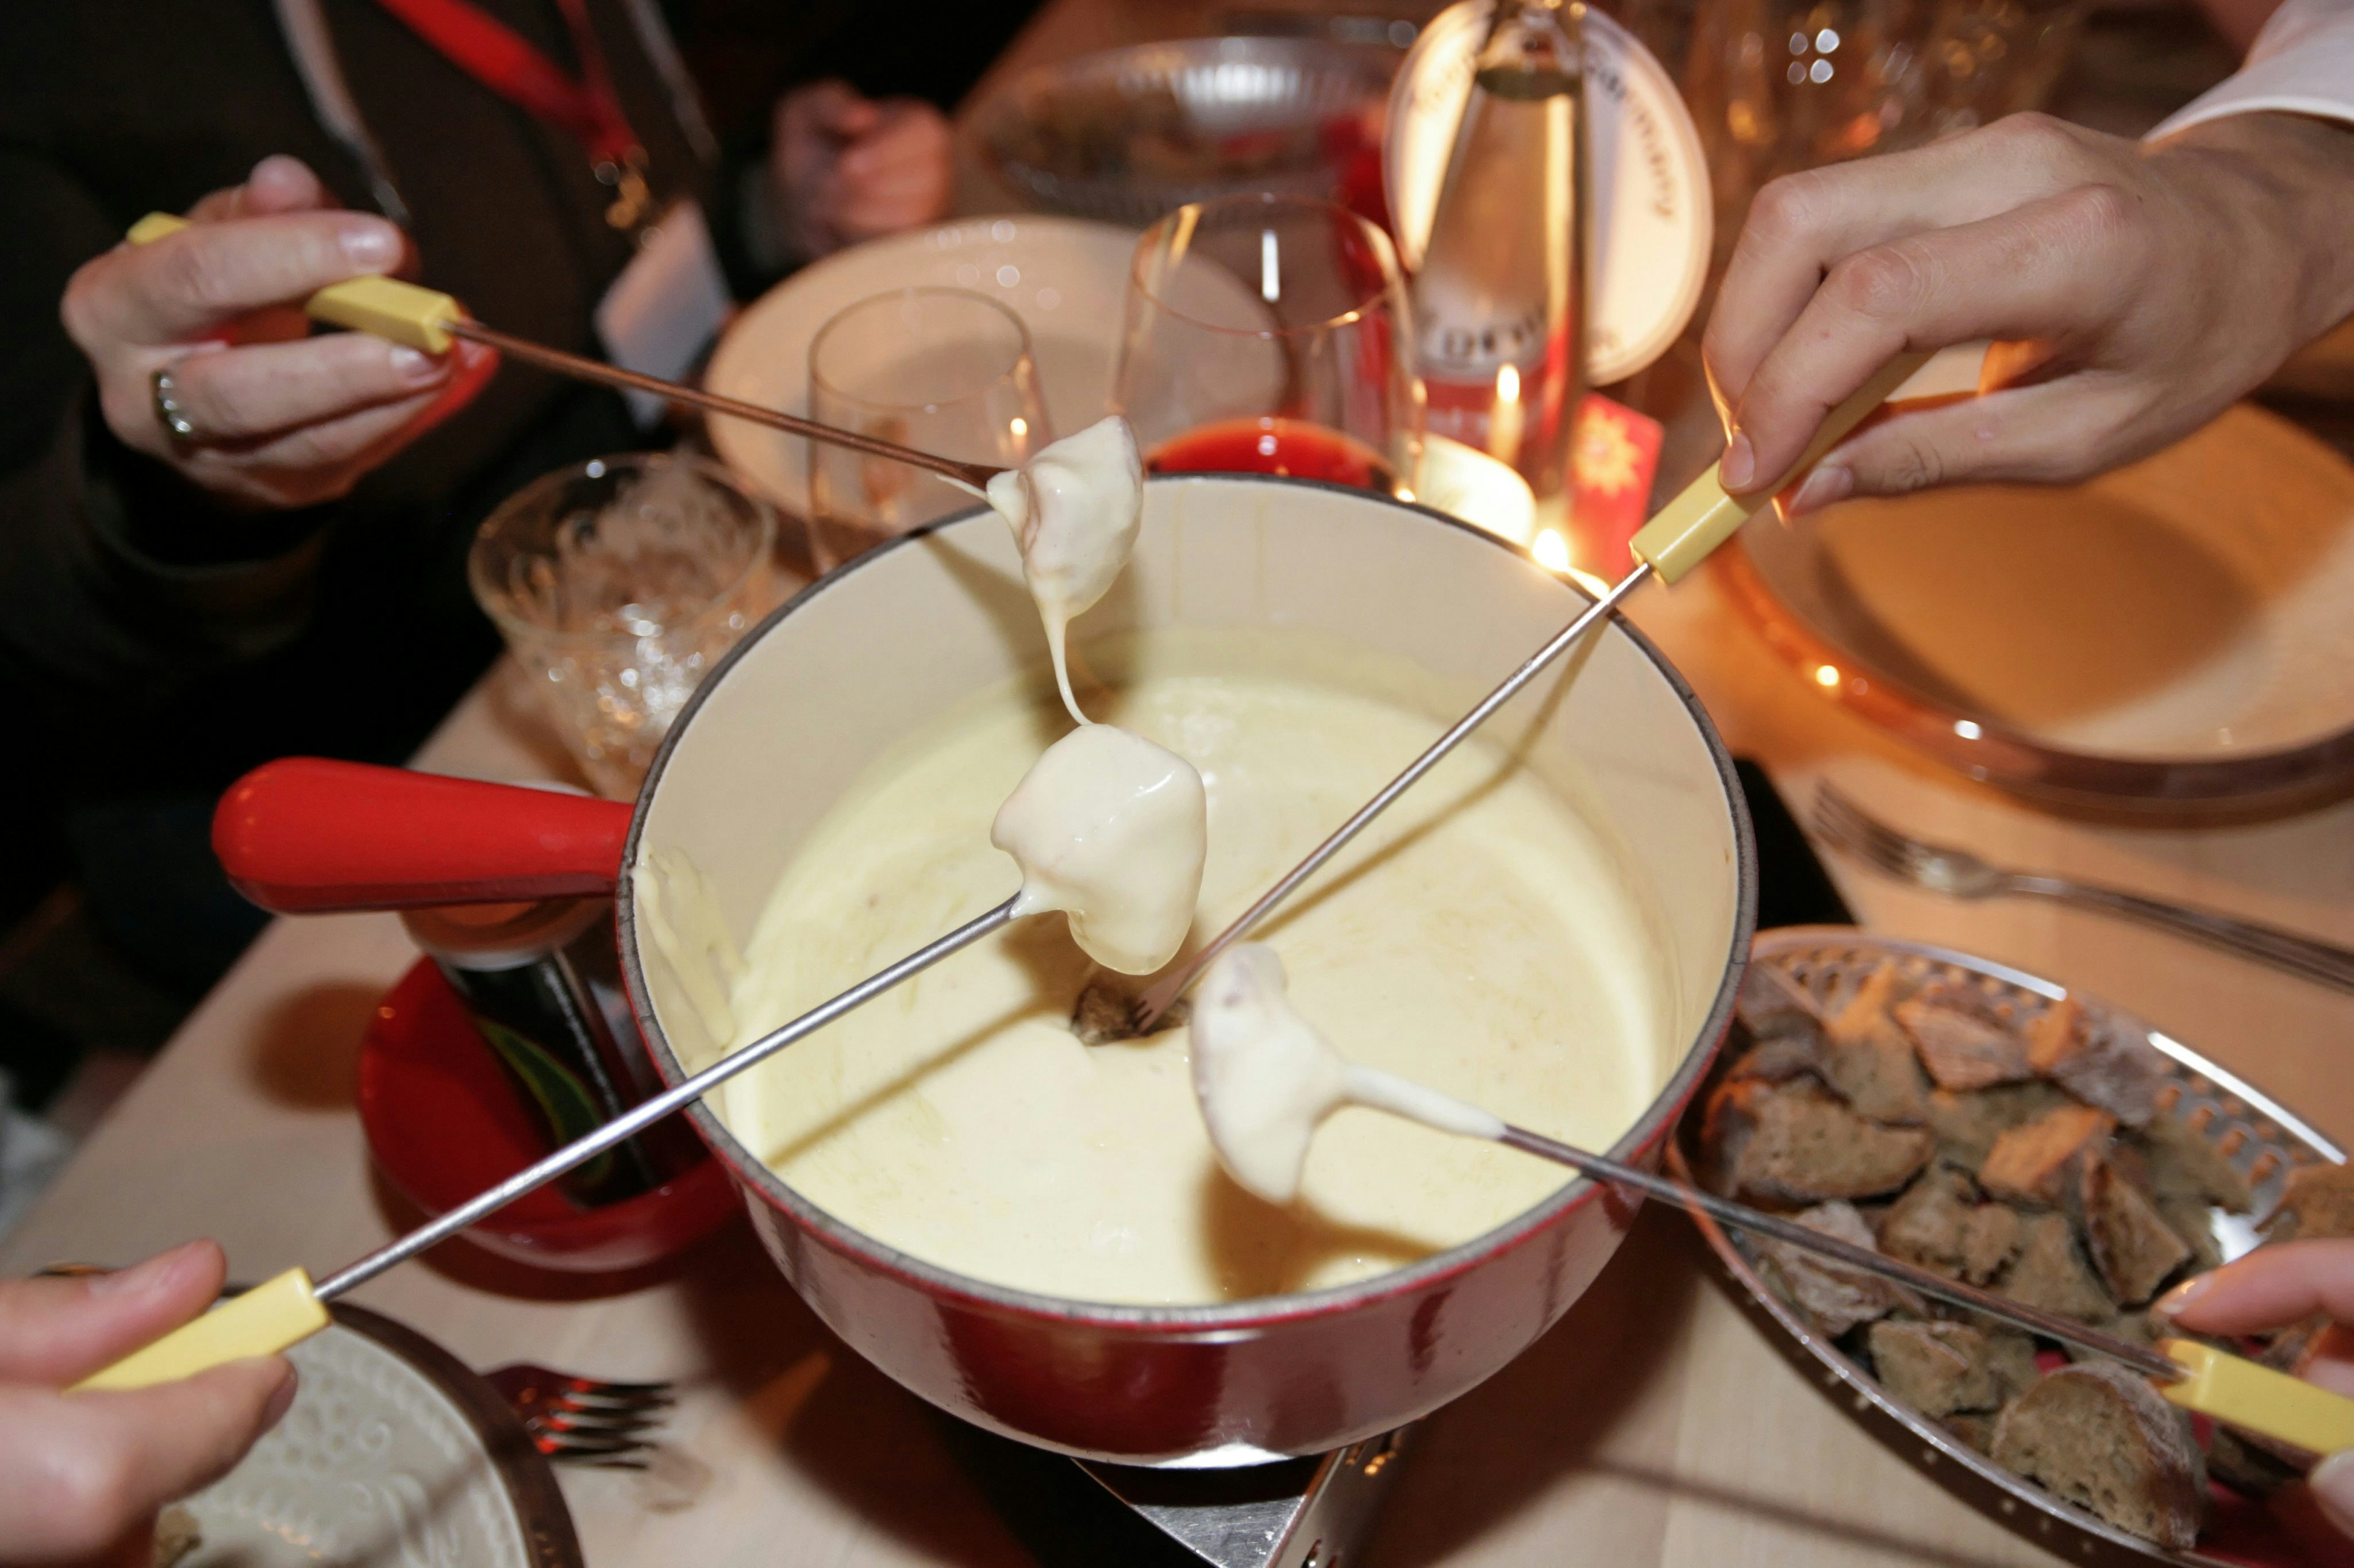 Several diners are dipping pieces of bread into a delicious cheese fondue with wood and metal fondu forks. The cheese is white and melty and the fondu pot is surrounded by smaller dishes and glasses of red wine 